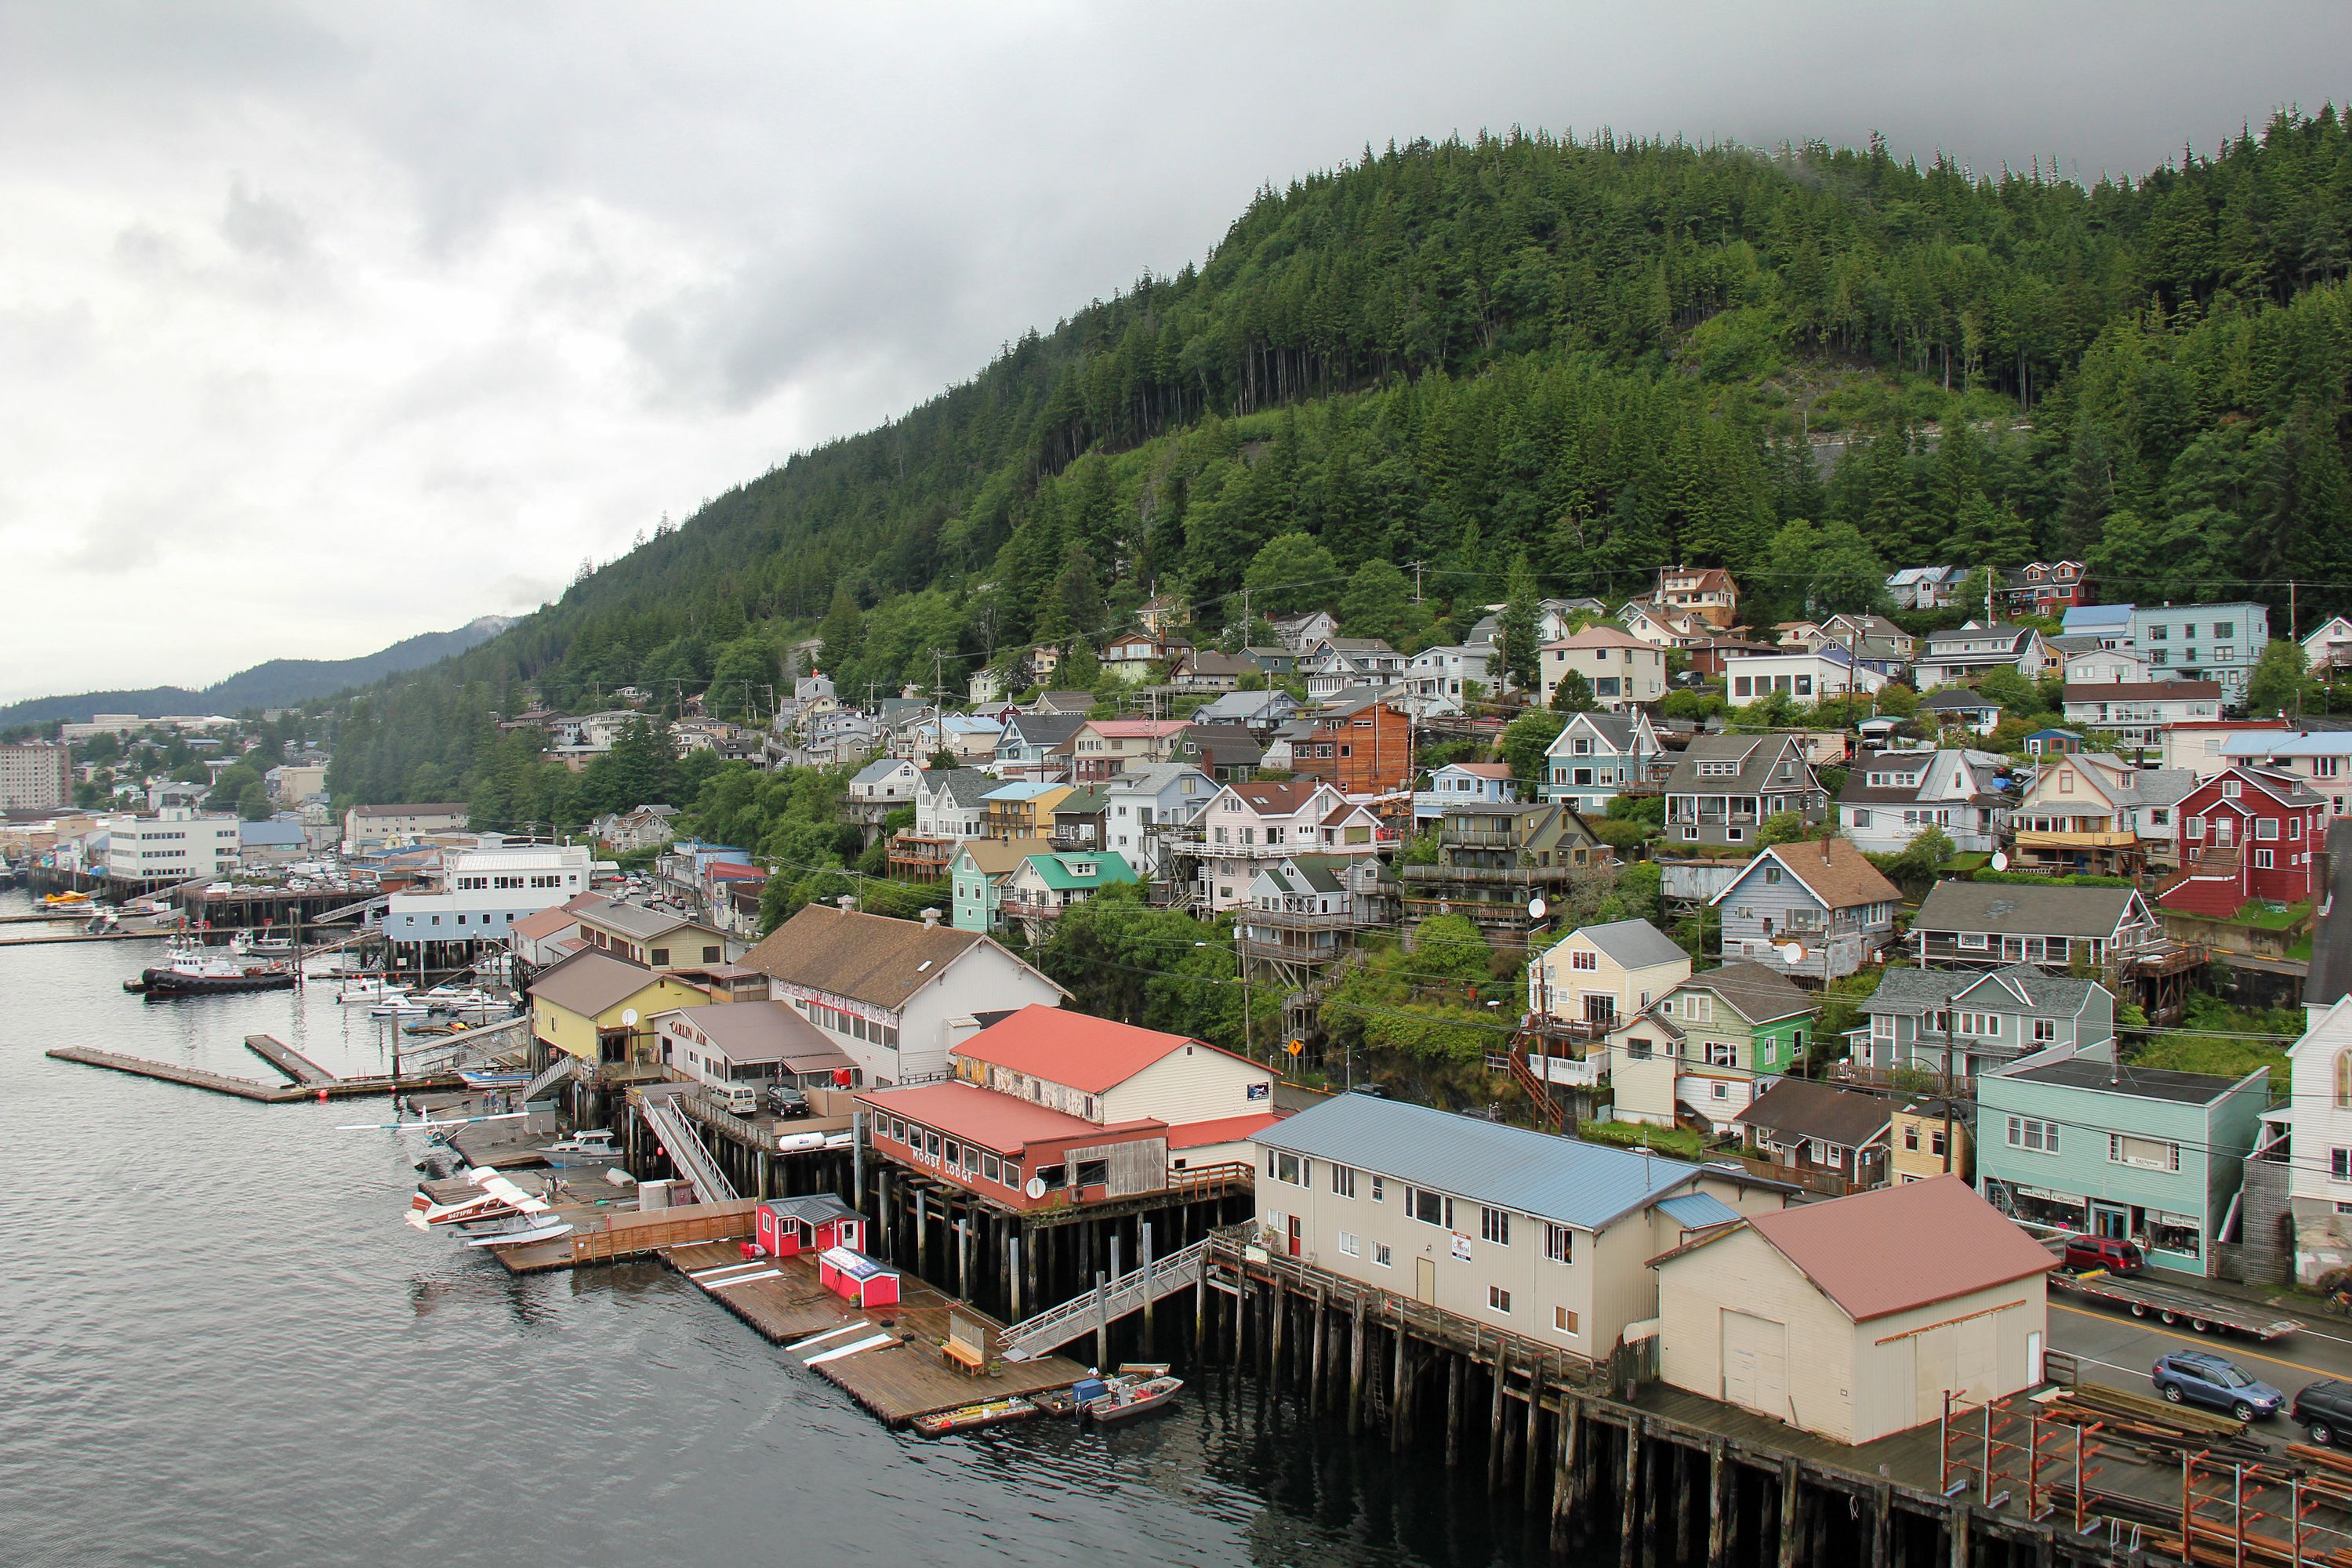 Port of Ketchikan - Tongass National Forest, Alaska. Image by Brian Lasenby / Shutterstock. United States, undated.